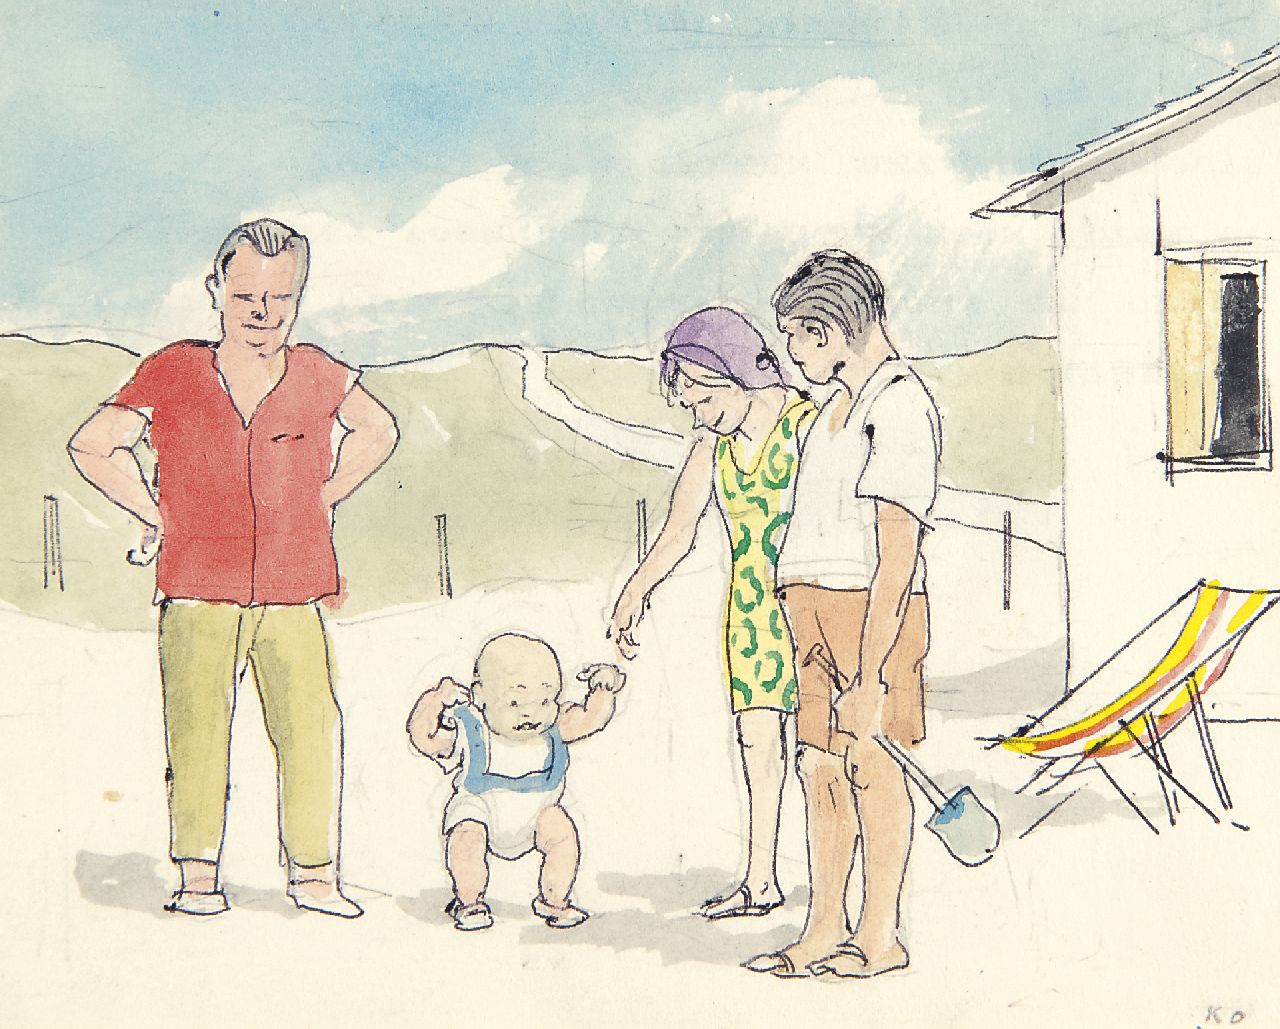 Kamerlingh Onnes H.H.  | 'Harm' Henrick Kamerlingh Onnes | Watercolours and drawings offered for sale | The first steps on the beach, watercolour on paper 11.5 x 14.3 cm, signed l.r. with initials